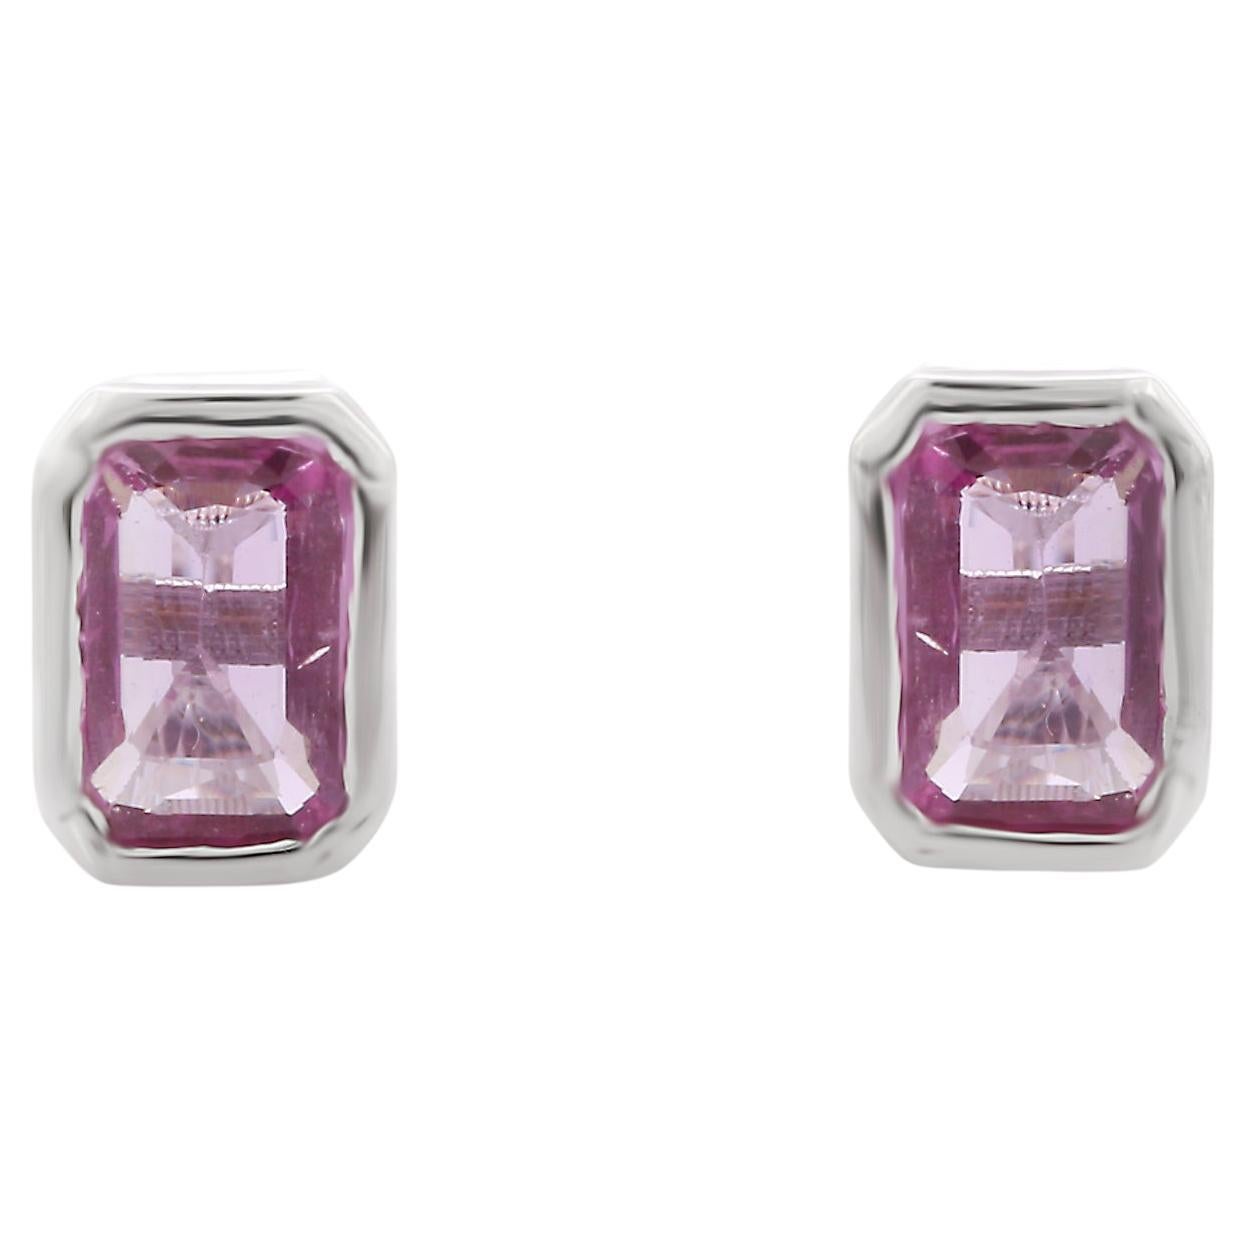 Natural Faceted Pink Sapphire 1.64 Carat Gold Stud Earring in 18K White Gold